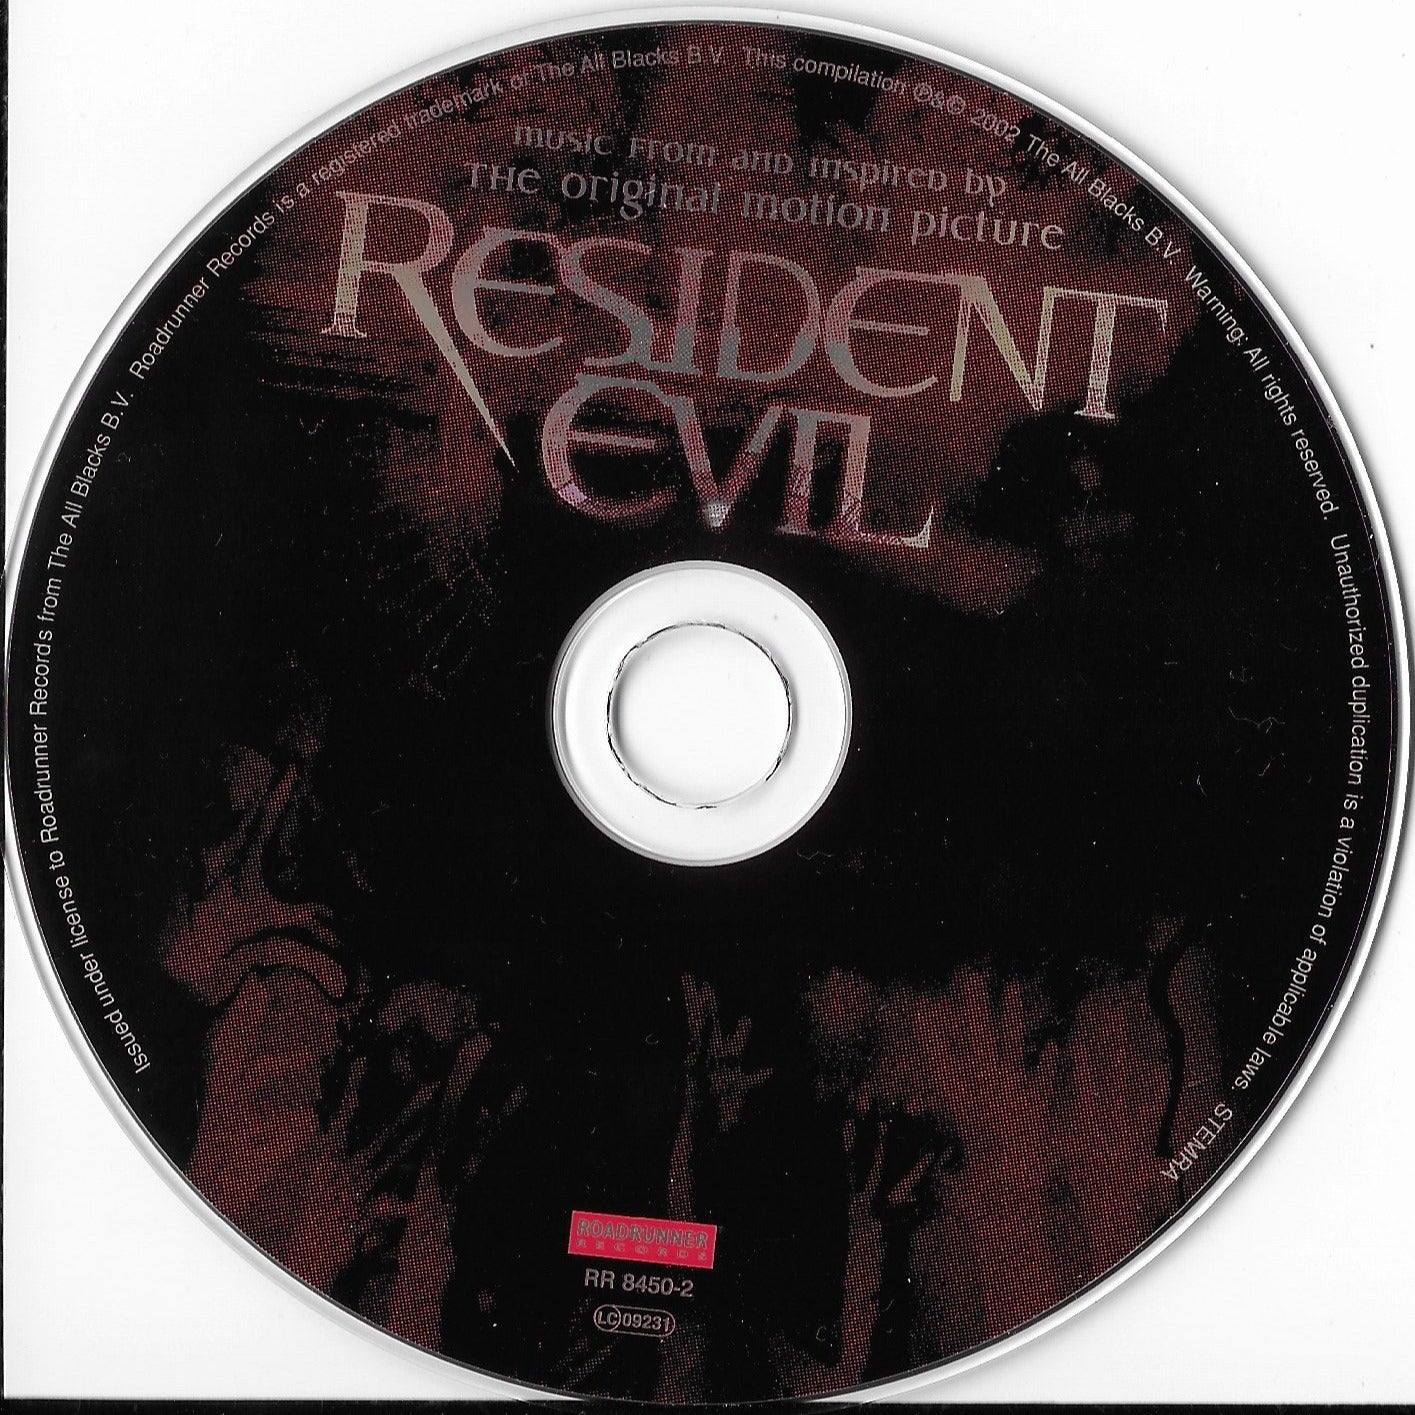 RESIDENT EVIL - Music From And Inspired By The Original Motion Picture